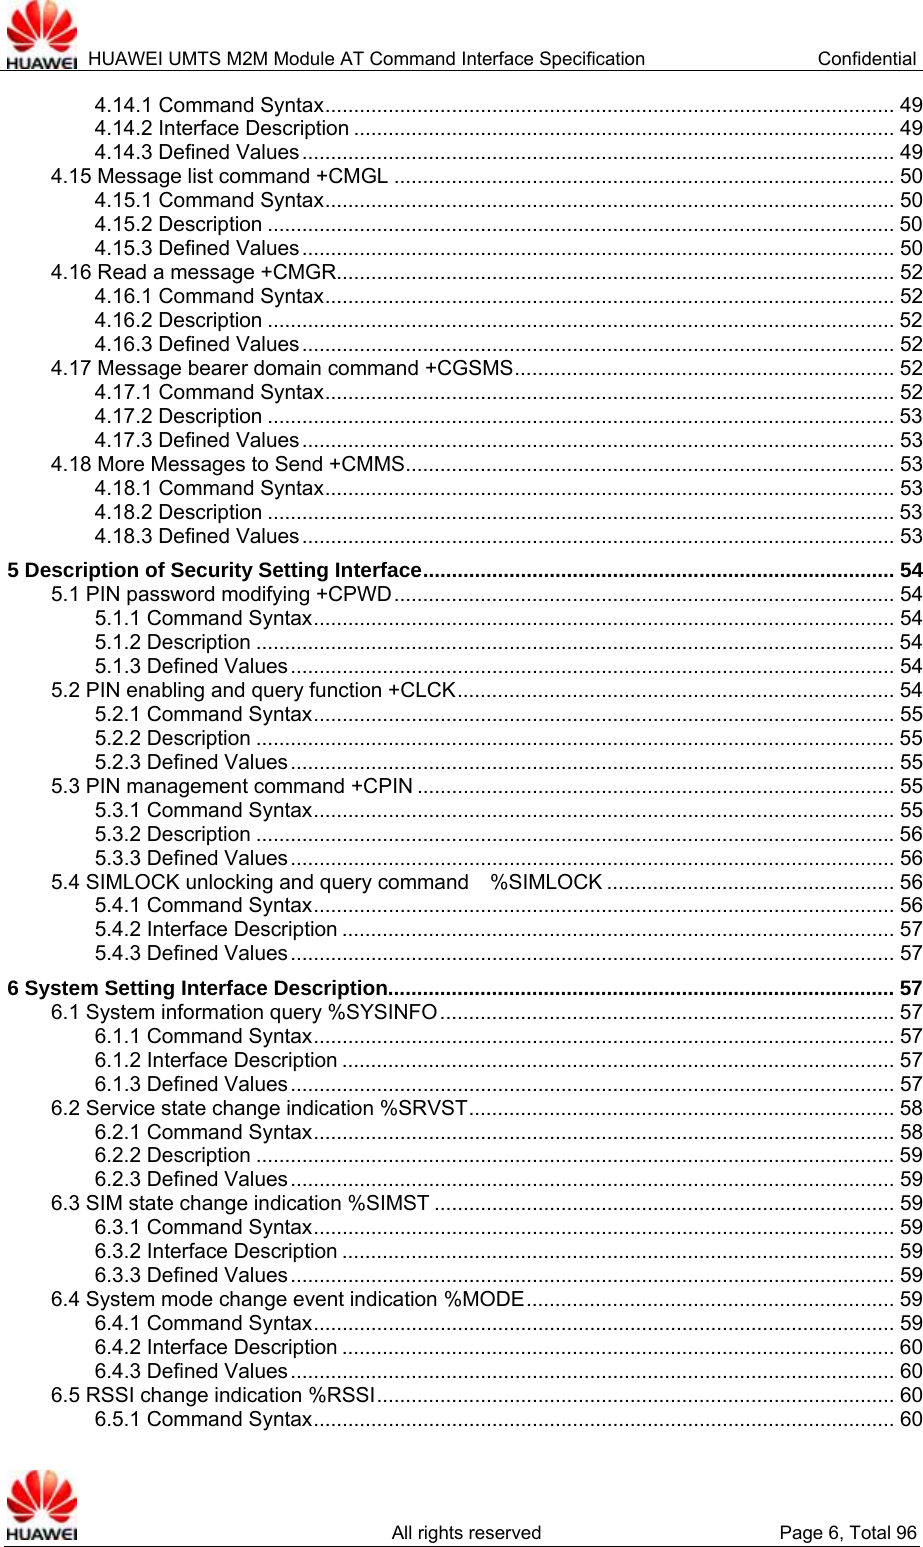  HUAWEI UMTS M2M Module AT Command Interface Specification  Confidential   All rights reserved  Page 6, Total 96 4.14.1 Command Syntax................................................................................................... 49 4.14.2 Interface Description .............................................................................................. 49 4.14.3 Defined Values....................................................................................................... 49 4.15 Message list command +CMGL ....................................................................................... 50 4.15.1 Command Syntax................................................................................................... 50 4.15.2 Description ............................................................................................................. 50 4.15.3 Defined Values....................................................................................................... 50 4.16 Read a message +CMGR................................................................................................. 52 4.16.1 Command Syntax................................................................................................... 52 4.16.2 Description ............................................................................................................. 52 4.16.3 Defined Values....................................................................................................... 52 4.17 Message bearer domain command +CGSMS.................................................................. 52 4.17.1 Command Syntax................................................................................................... 52 4.17.2 Description ............................................................................................................. 53 4.17.3 Defined Values....................................................................................................... 53 4.18 More Messages to Send +CMMS..................................................................................... 53 4.18.1 Command Syntax................................................................................................... 53 4.18.2 Description ............................................................................................................. 53 4.18.3 Defined Values....................................................................................................... 53 5 Description of Security Setting Interface.................................................................................. 54 5.1 PIN password modifying +CPWD....................................................................................... 54 5.1.1 Command Syntax..................................................................................................... 54 5.1.2 Description ...............................................................................................................54 5.1.3 Defined Values......................................................................................................... 54 5.2 PIN enabling and query function +CLCK............................................................................ 54 5.2.1 Command Syntax..................................................................................................... 55 5.2.2 Description ...............................................................................................................55 5.2.3 Defined Values......................................................................................................... 55 5.3 PIN management command +CPIN ................................................................................... 55 5.3.1 Command Syntax..................................................................................................... 55 5.3.2 Description ...............................................................................................................56 5.3.3 Defined Values......................................................................................................... 56 5.4 SIMLOCK unlocking and query command    %SIMLOCK .................................................. 56 5.4.1 Command Syntax..................................................................................................... 56 5.4.2 Interface Description ................................................................................................ 57 5.4.3 Defined Values......................................................................................................... 57 6 System Setting Interface Description........................................................................................ 57 6.1 System information query %SYSINFO............................................................................... 57 6.1.1 Command Syntax..................................................................................................... 57 6.1.2 Interface Description ................................................................................................ 57 6.1.3 Defined Values......................................................................................................... 57 6.2 Service state change indication %SRVST.......................................................................... 58 6.2.1 Command Syntax..................................................................................................... 58 6.2.2 Description ...............................................................................................................59 6.2.3 Defined Values......................................................................................................... 59 6.3 SIM state change indication %SIMST ................................................................................ 59 6.3.1 Command Syntax..................................................................................................... 59 6.3.2 Interface Description ................................................................................................ 59 6.3.3 Defined Values......................................................................................................... 59 6.4 System mode change event indication %MODE................................................................ 59 6.4.1 Command Syntax..................................................................................................... 59 6.4.2 Interface Description ................................................................................................ 60 6.4.3 Defined Values......................................................................................................... 60 6.5 RSSI change indication %RSSI.......................................................................................... 60 6.5.1 Command Syntax..................................................................................................... 60 